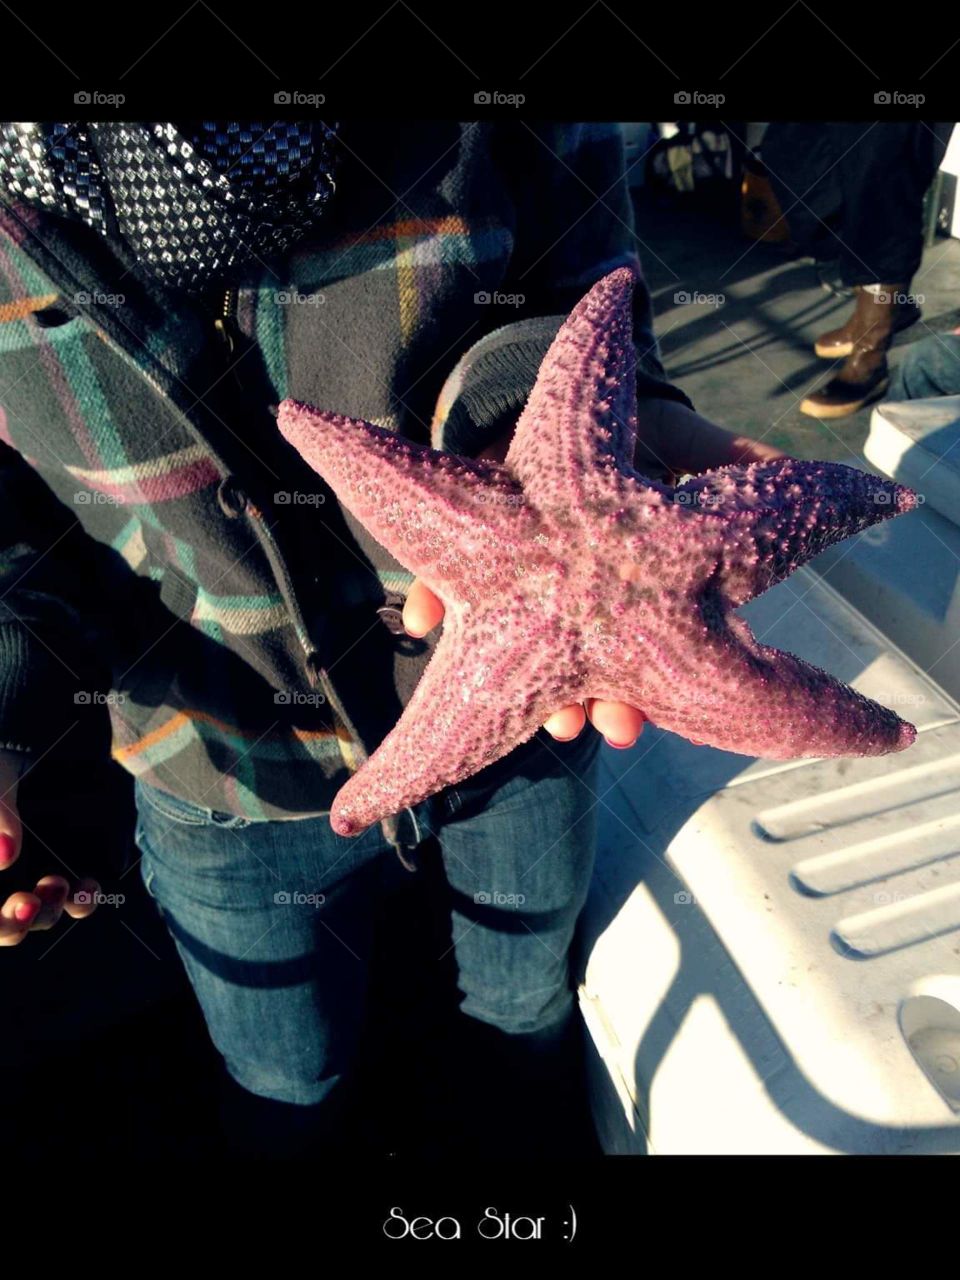 That awkward moment when a starfish gets stuck in a crab pot (Fort Bragg, CA)